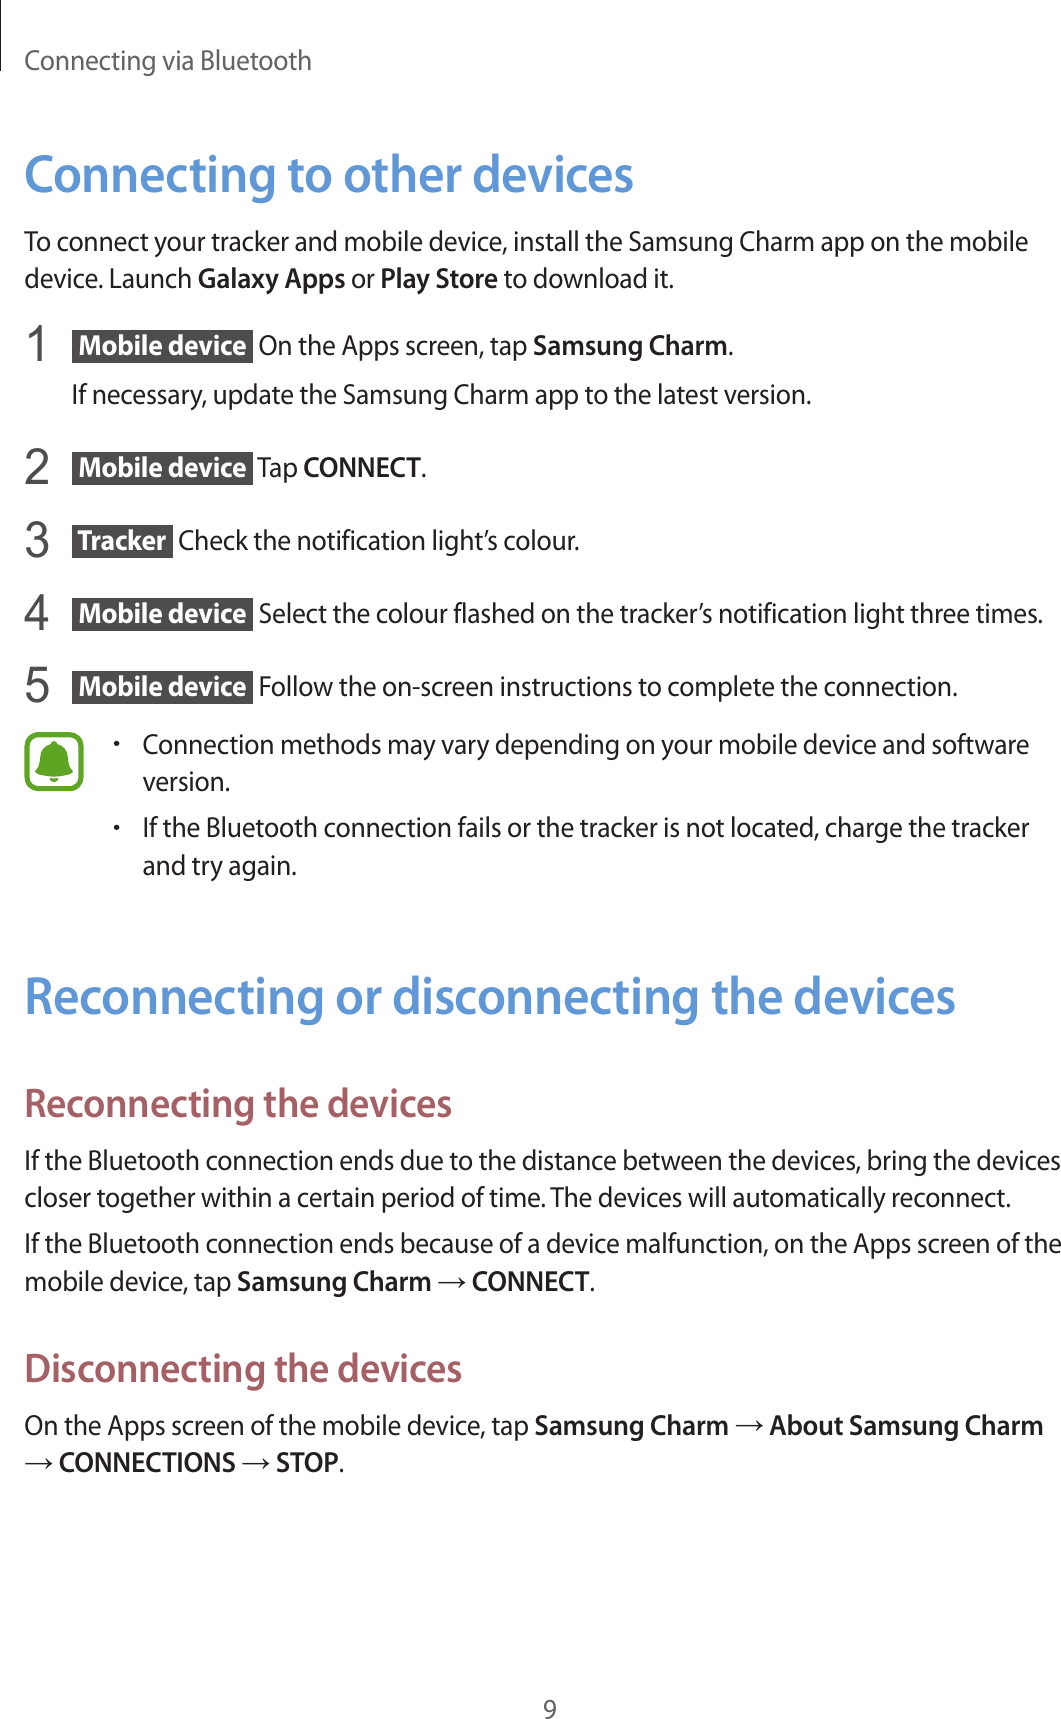 Connecting via Bluetooth9Connecting to other devicesTo connect your tracker and mobile device, install the Samsung Charm app on the mobile device. Launch Galaxy Apps or Play Store to download it.1   Mobile device  On the Apps screen, tap Samsung Charm.If necessary, update the Samsung Charm app to the latest version.2   Mobile device  Tap CONNECT.3   Tracker  Check the notification light’s colour.4   Mobile device  Select the colour flashed on the tracker’s notification light three times.5   Mobile device  Follow the on-screen instructions to complete the connection.•Connection methods may vary depending on your mobile device and software version.•If the Bluetooth connection fails or the tracker is not located, charge the tracker and try again.Reconnecting or disconnecting the devicesReconnecting the devicesIf the Bluetooth connection ends due to the distance between the devices, bring the devices closer together within a certain period of time. The devices will automatically reconnect.If the Bluetooth connection ends because of a device malfunction, on the Apps screen of the mobile device, tap Samsung Charm → CONNECT.Disconnecting the devicesOn the Apps screen of the mobile device, tap Samsung Charm → About Samsung Charm → CONNECTIONS → STOP.